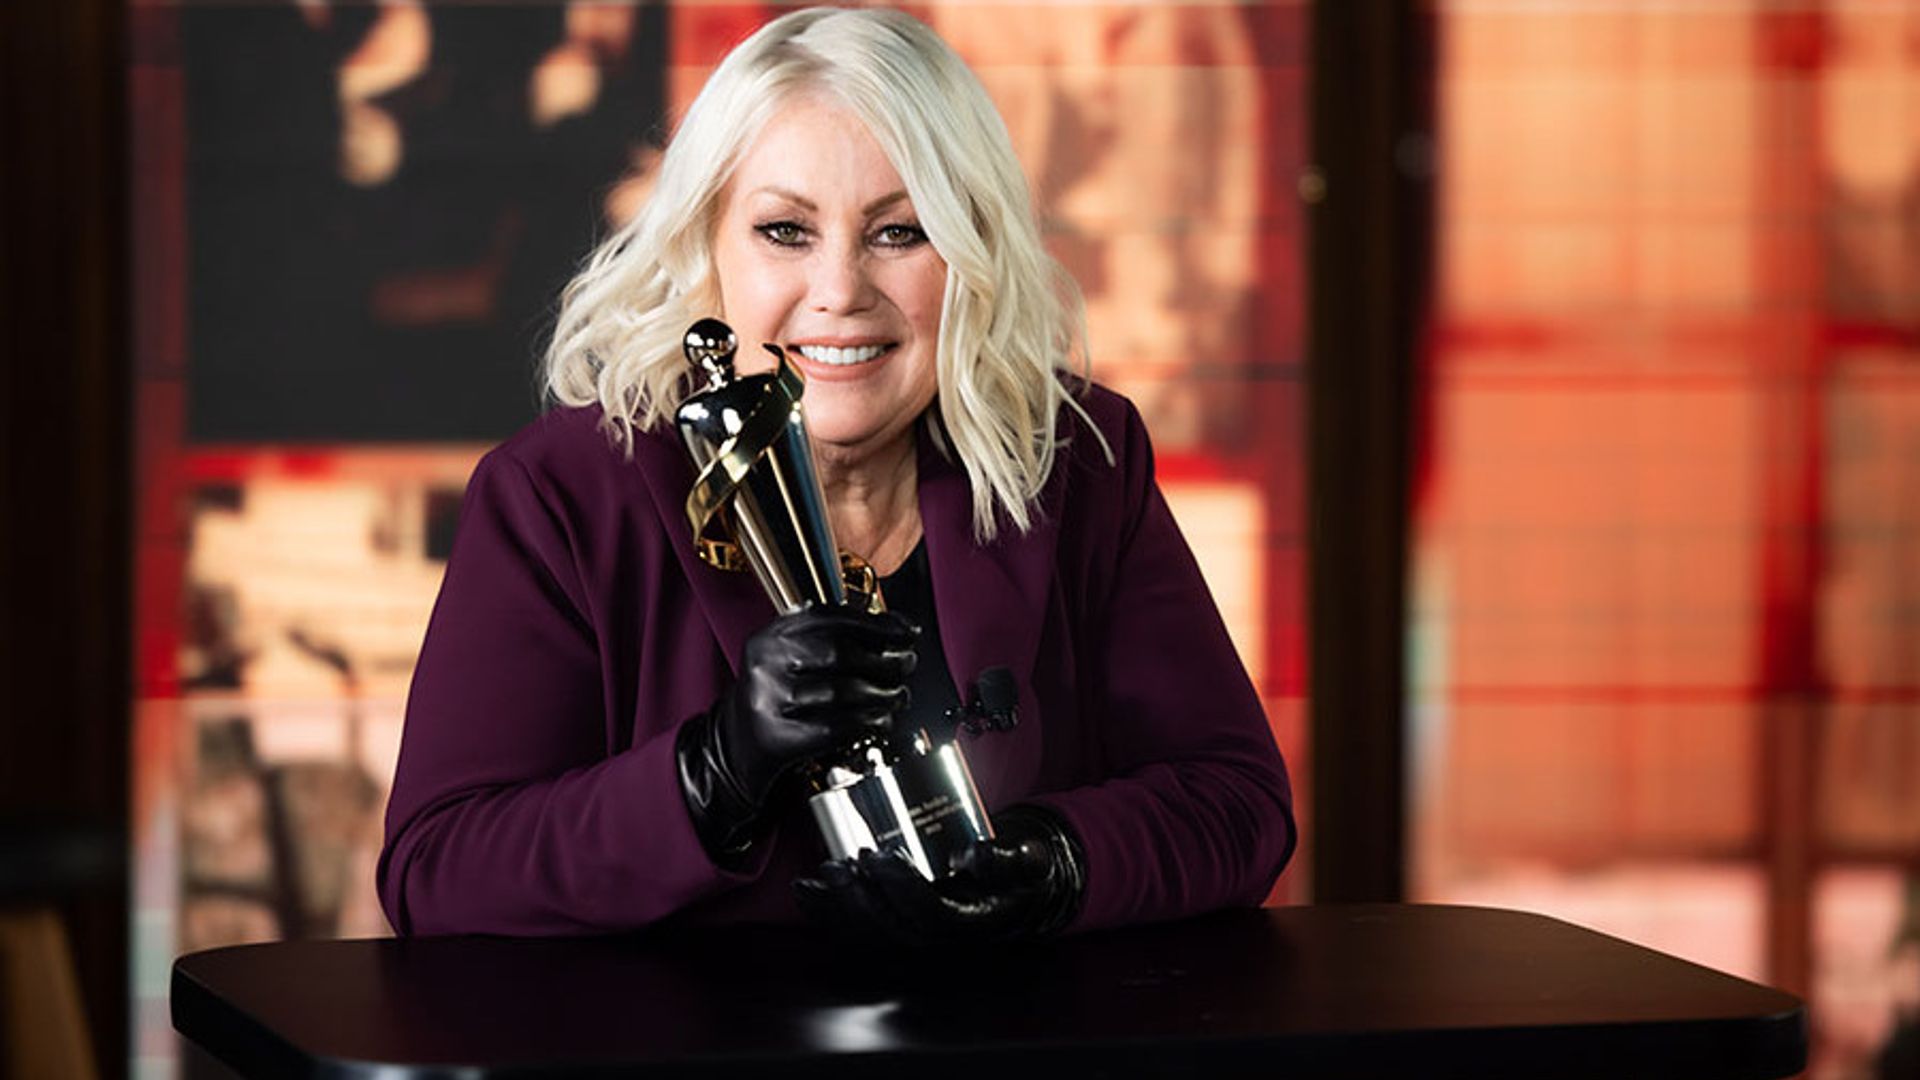 Watch Jann Arden's emotional performance and speech from her Canadian Music Hall of Fame induction at the JUNOs